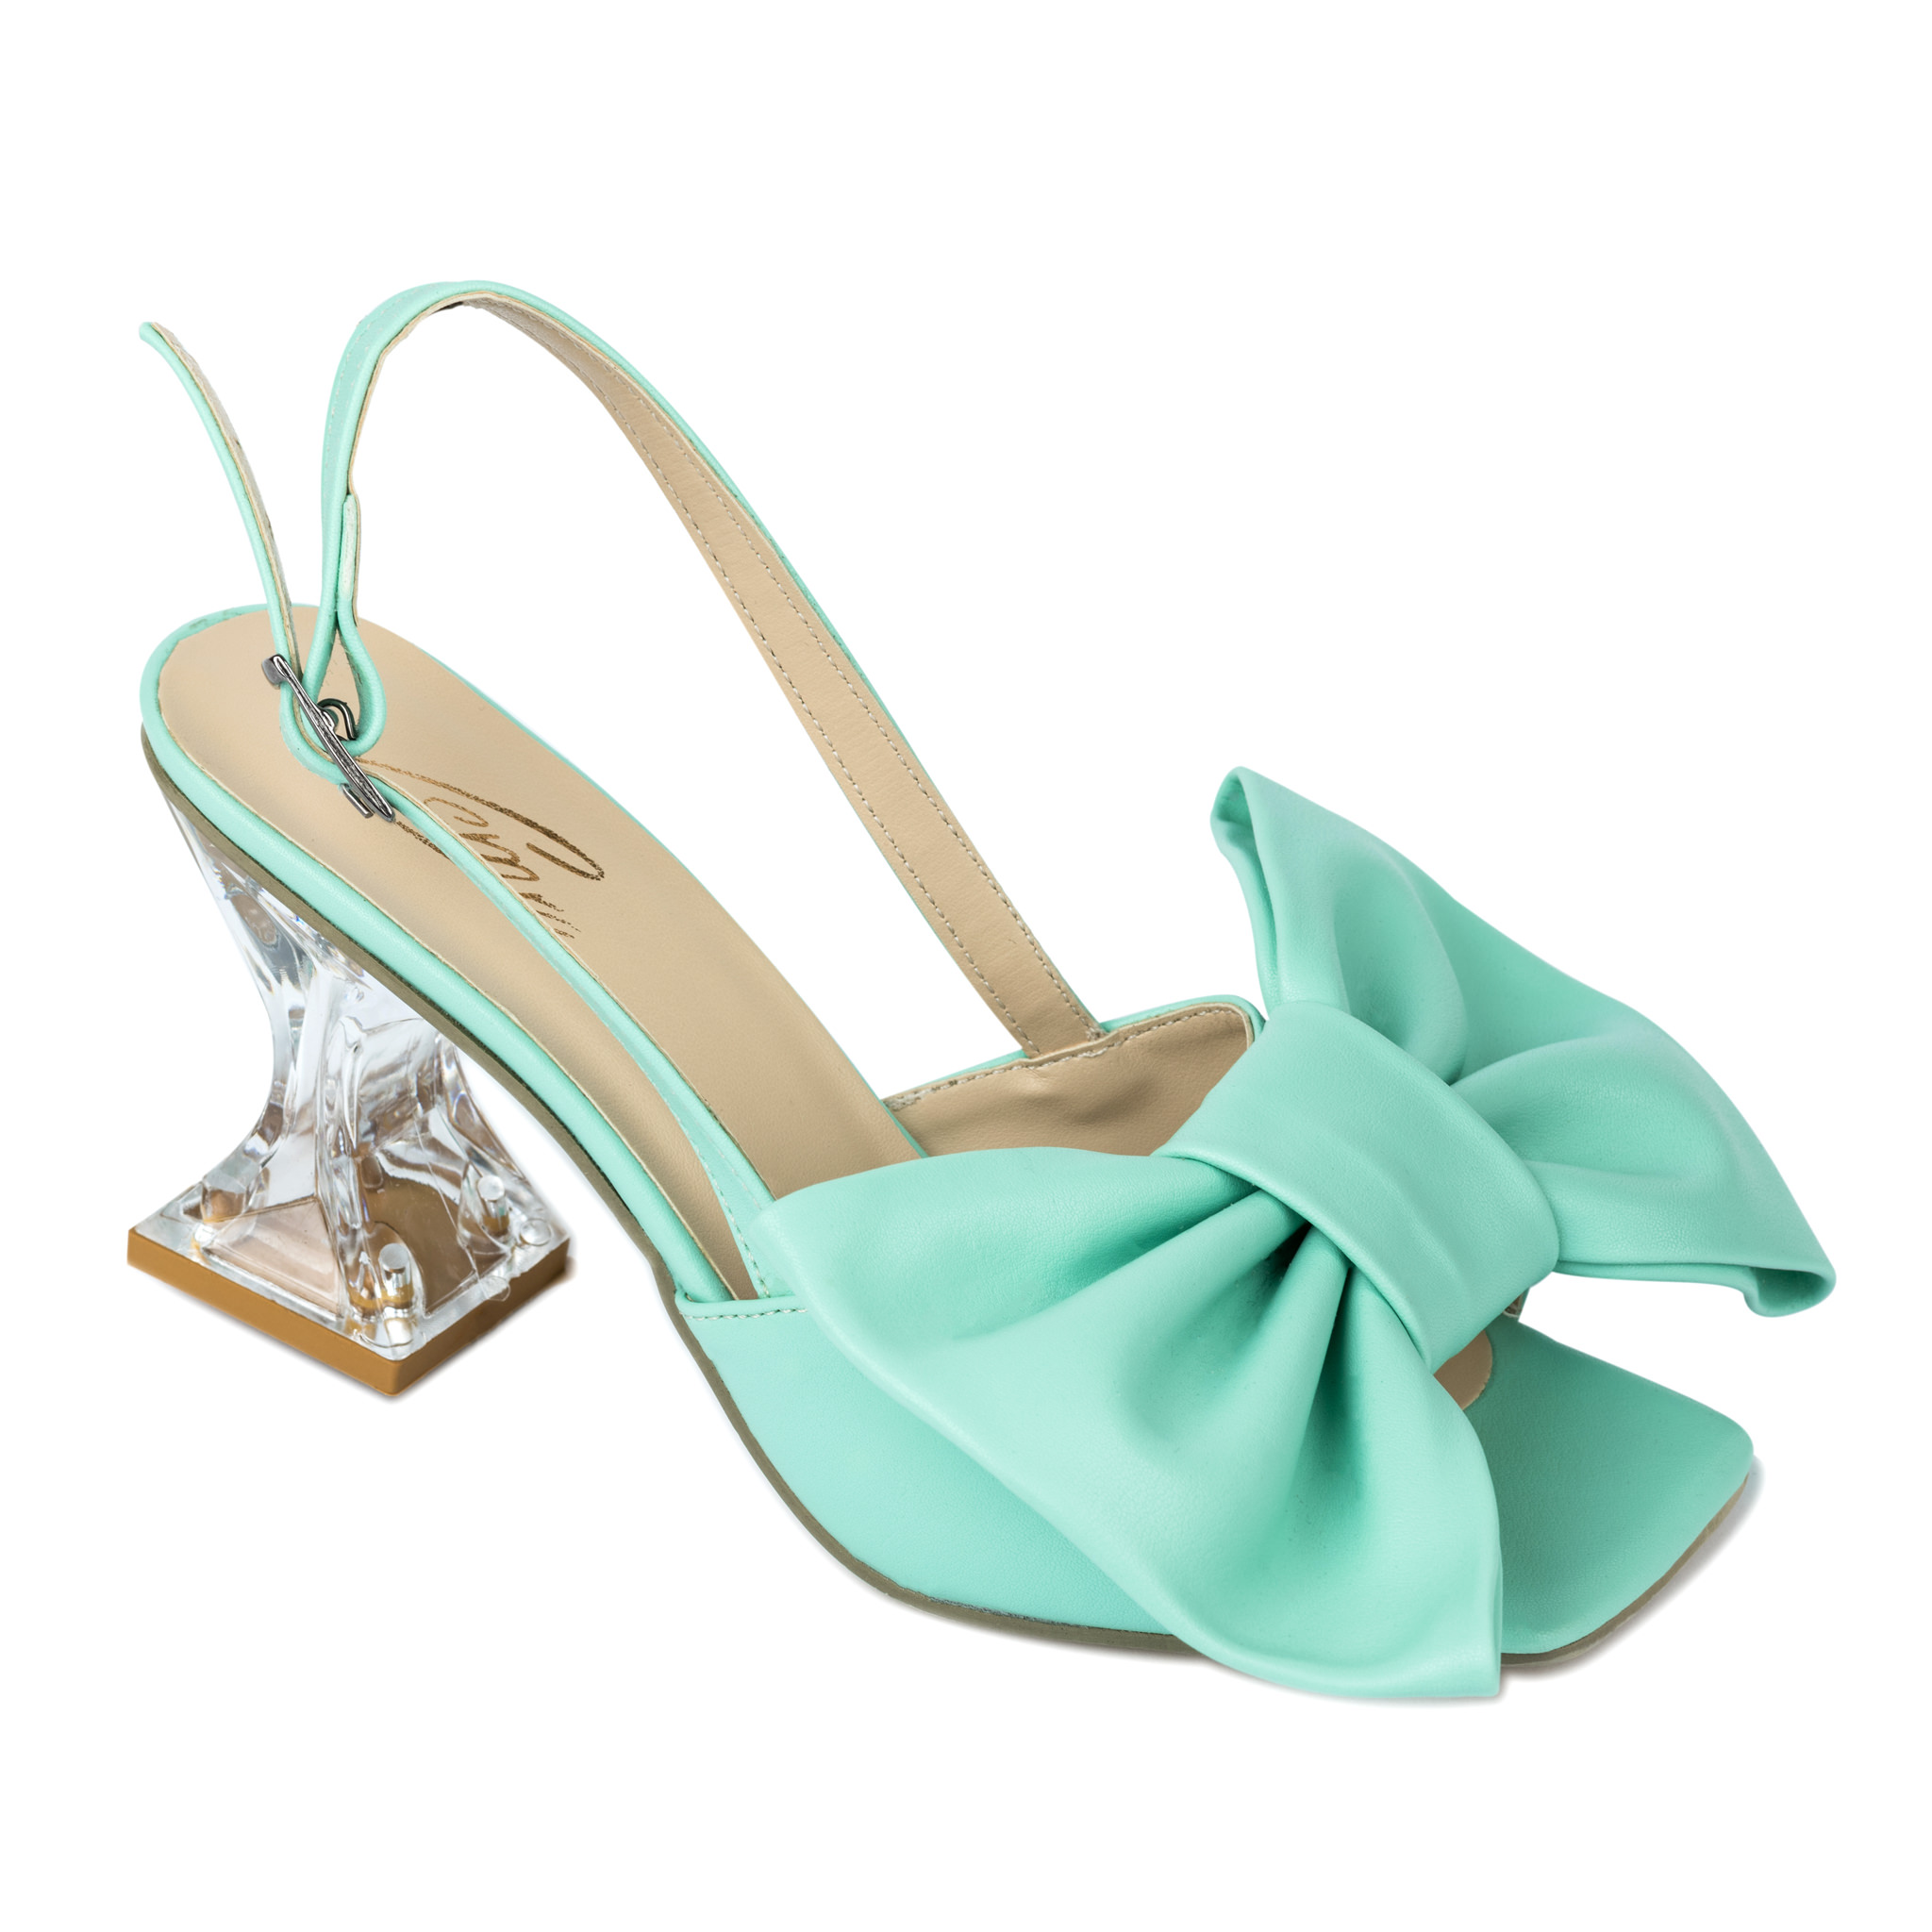 SANDALS WITH CLEAR HEEL AND BOW - MINT